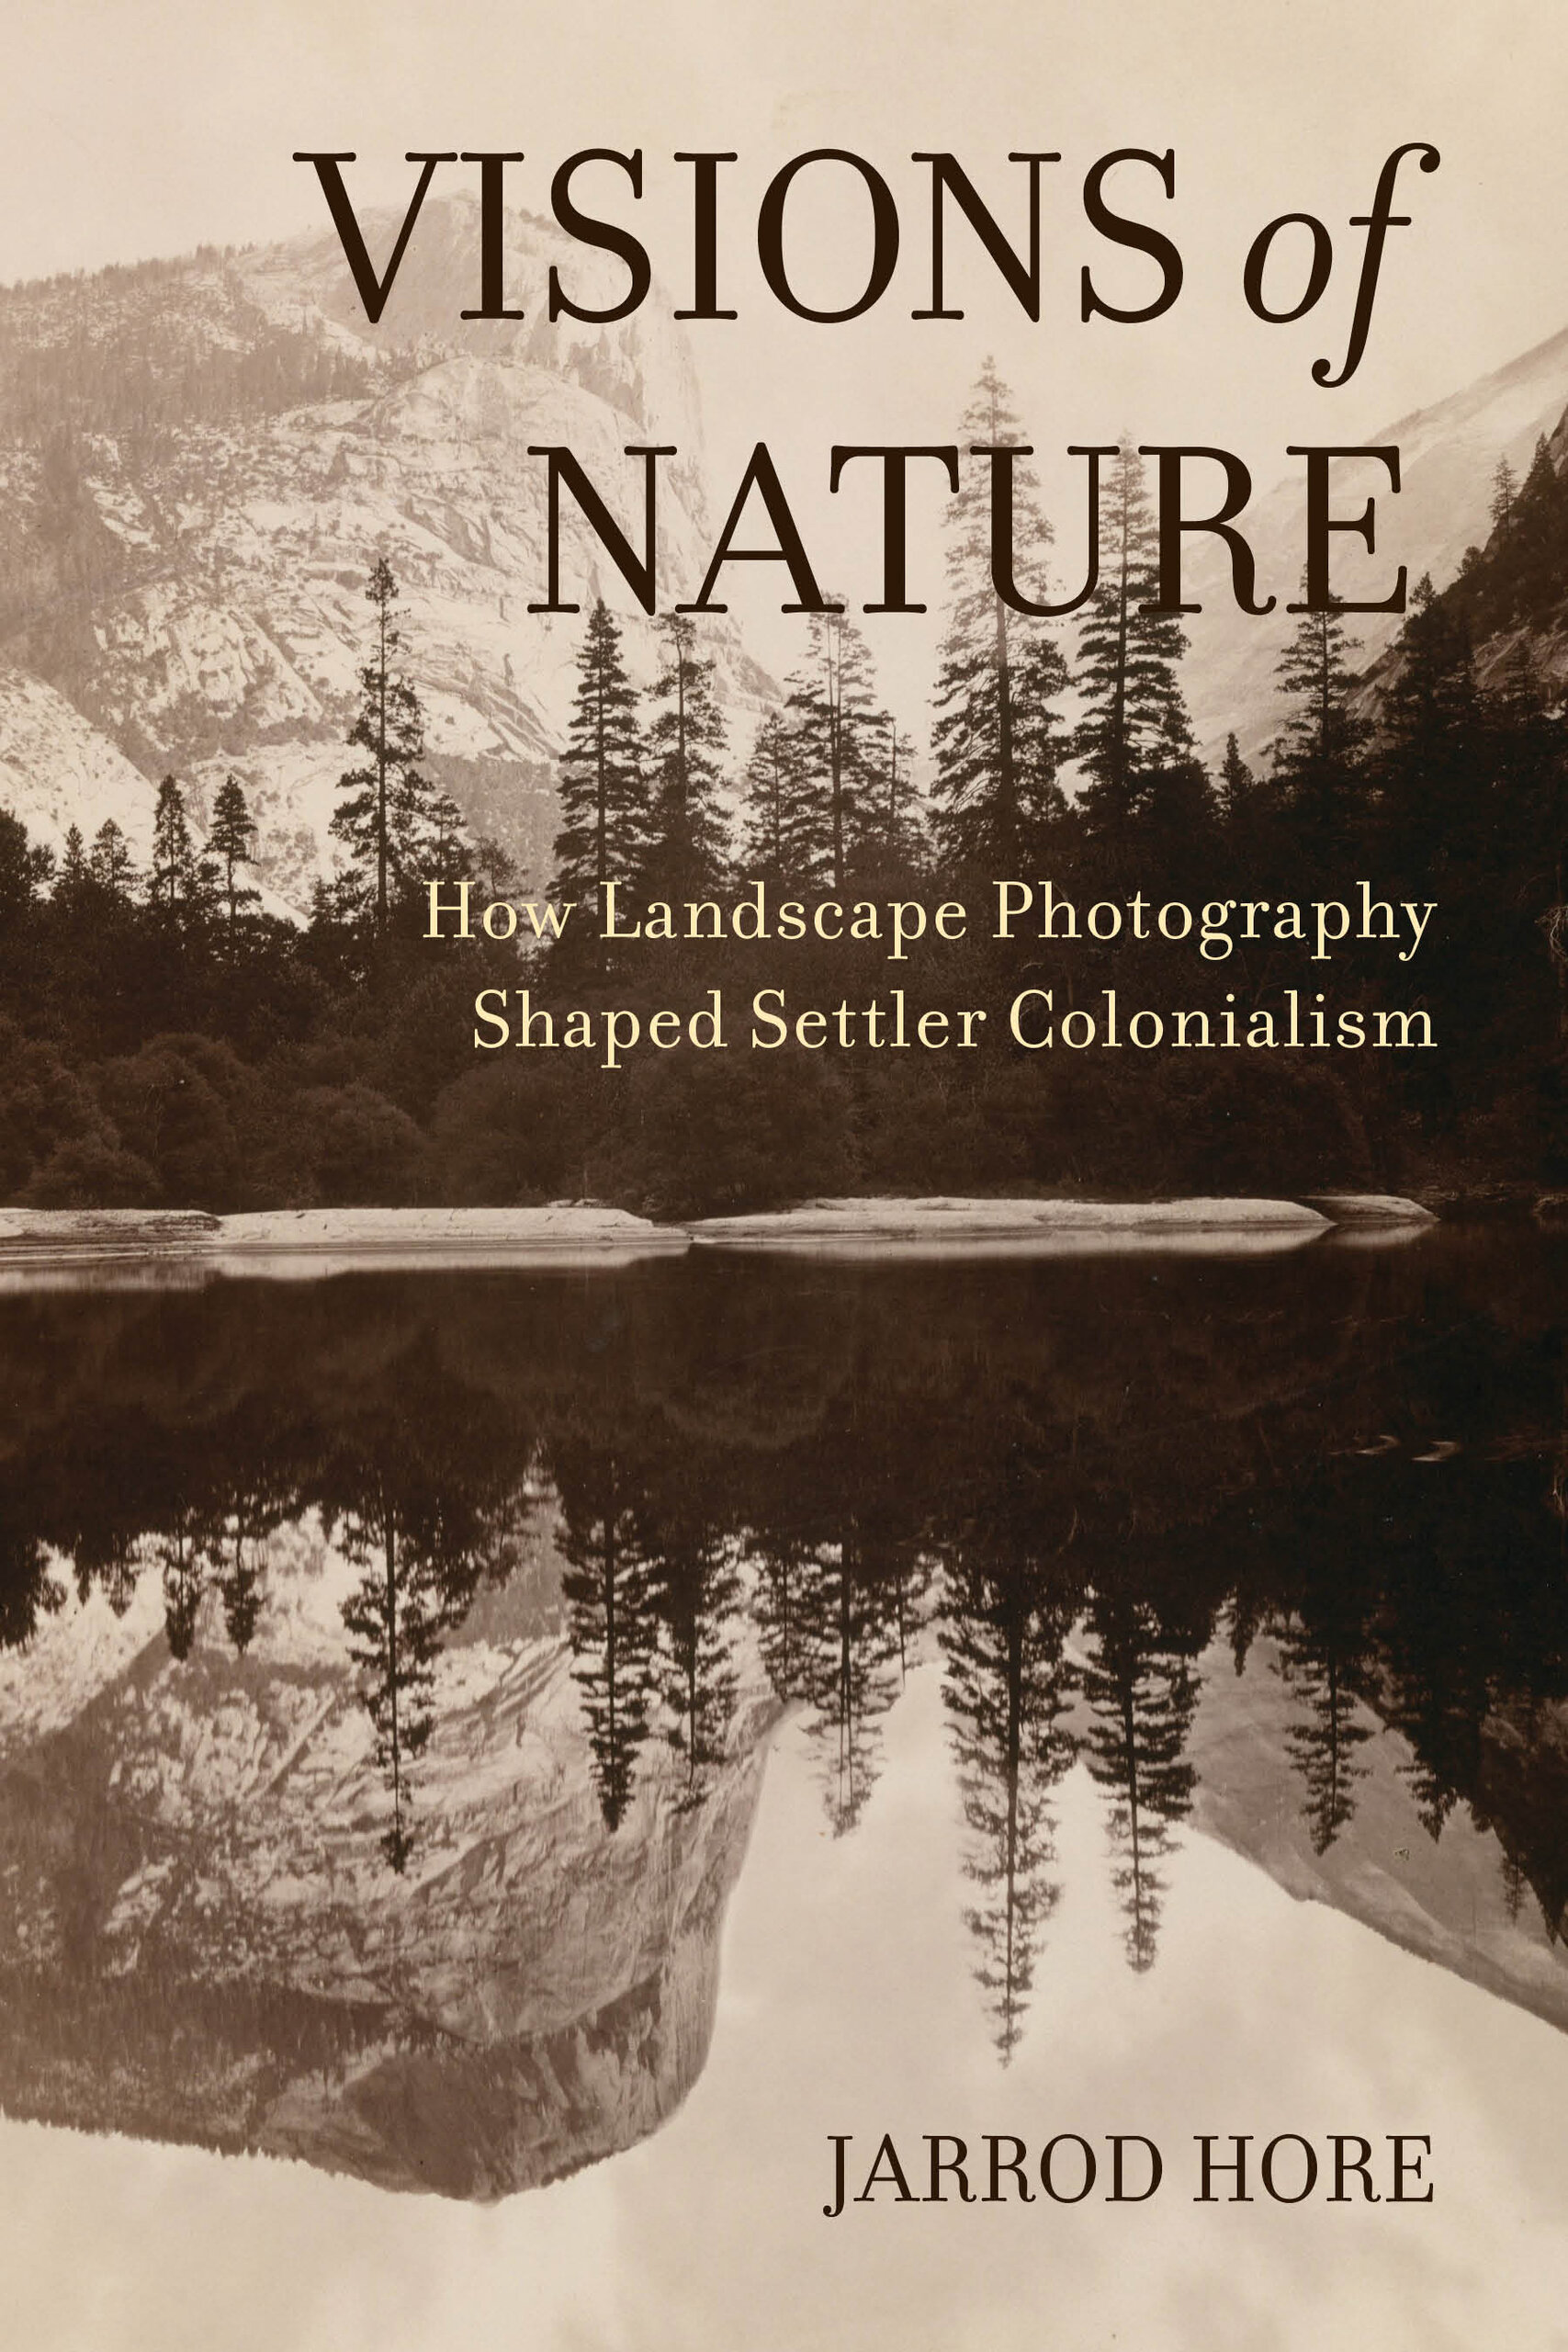 Online book talk: Hore, Visions of Nature